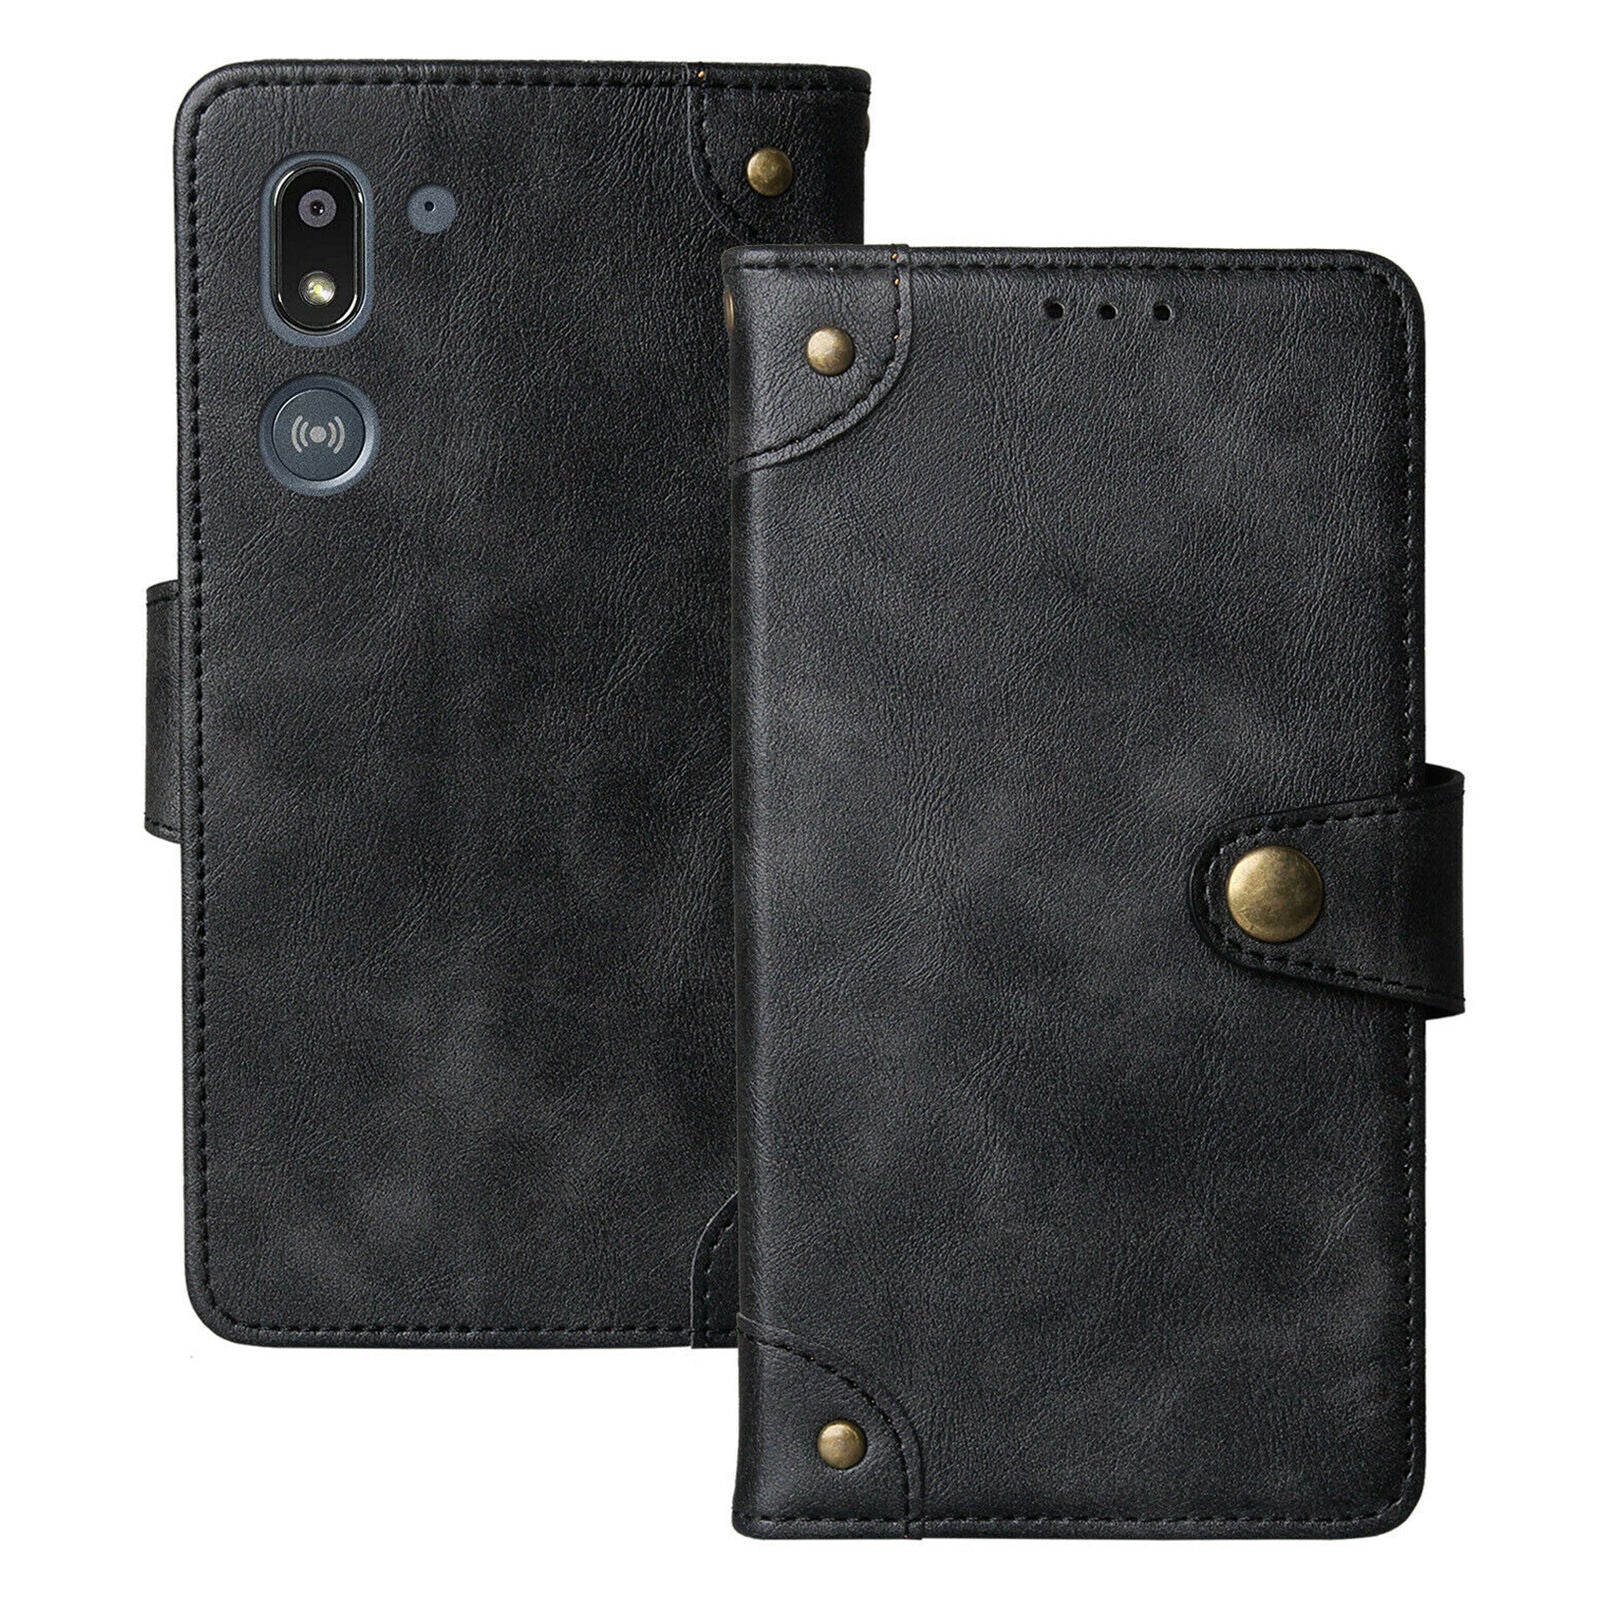 For Doro 8050 - Flip Real Leather Case Protection Cover Protective TPU Silicone